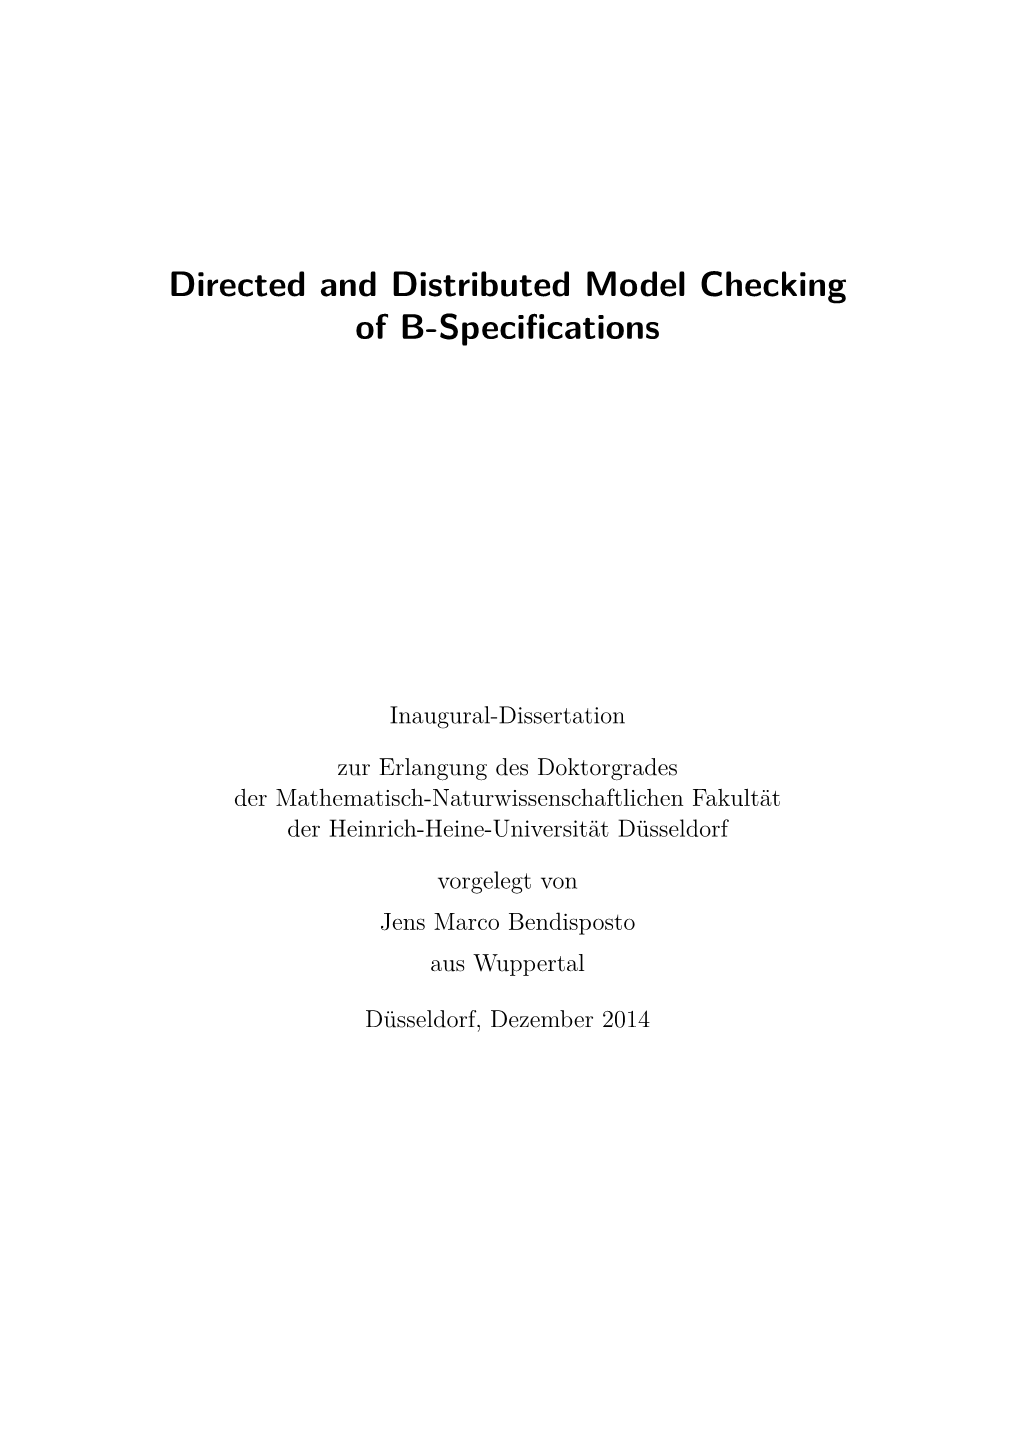 Directed and Distributed Model Checking of B-Specifications